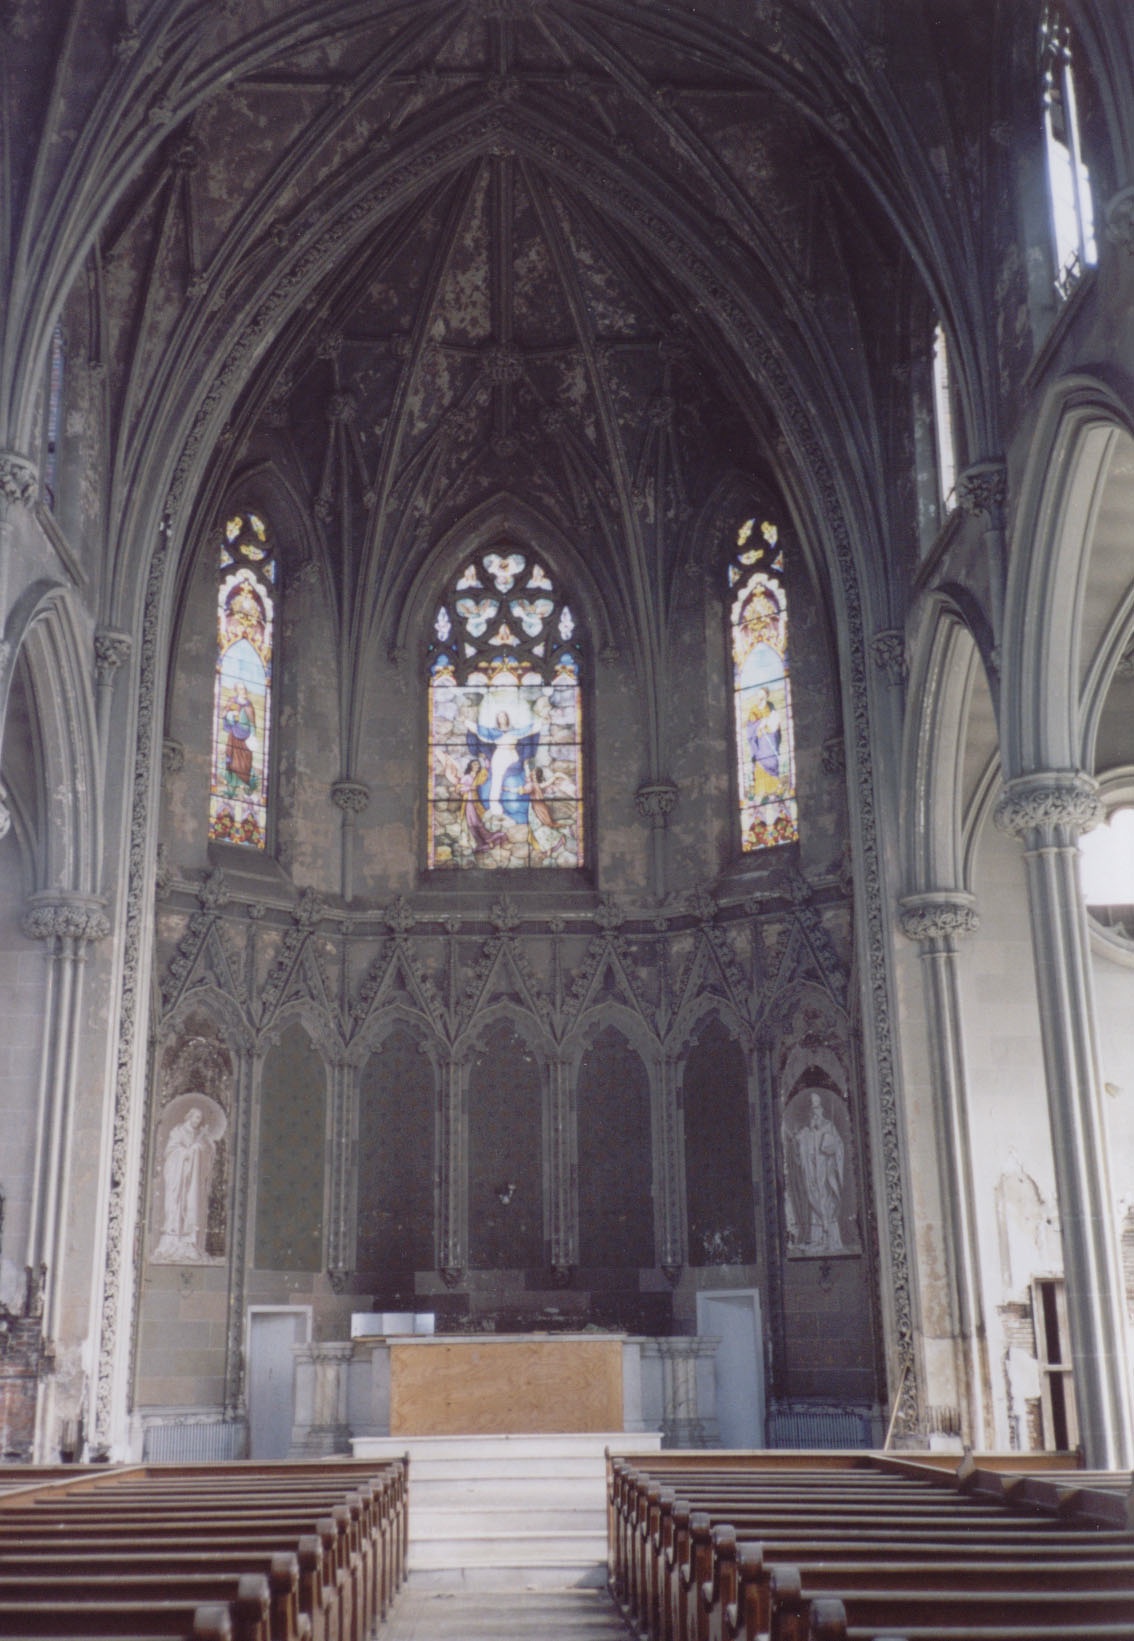 In 2007, the interior of the church still had its stained-glass windows and interior decor.